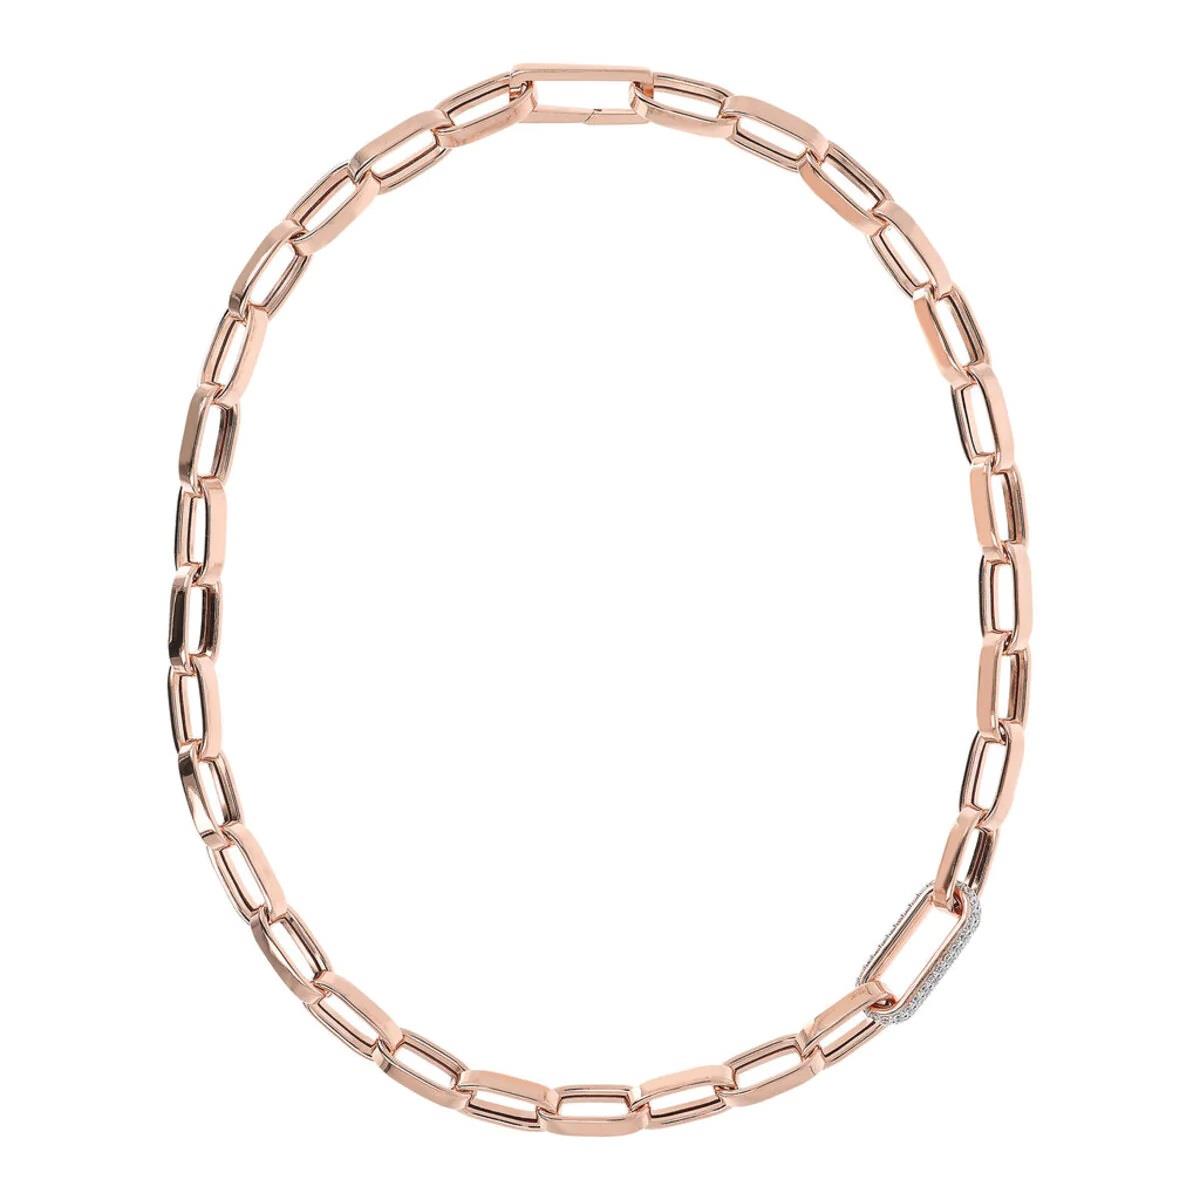 Thick chain necklace and pavé detail - BRONZALLURE